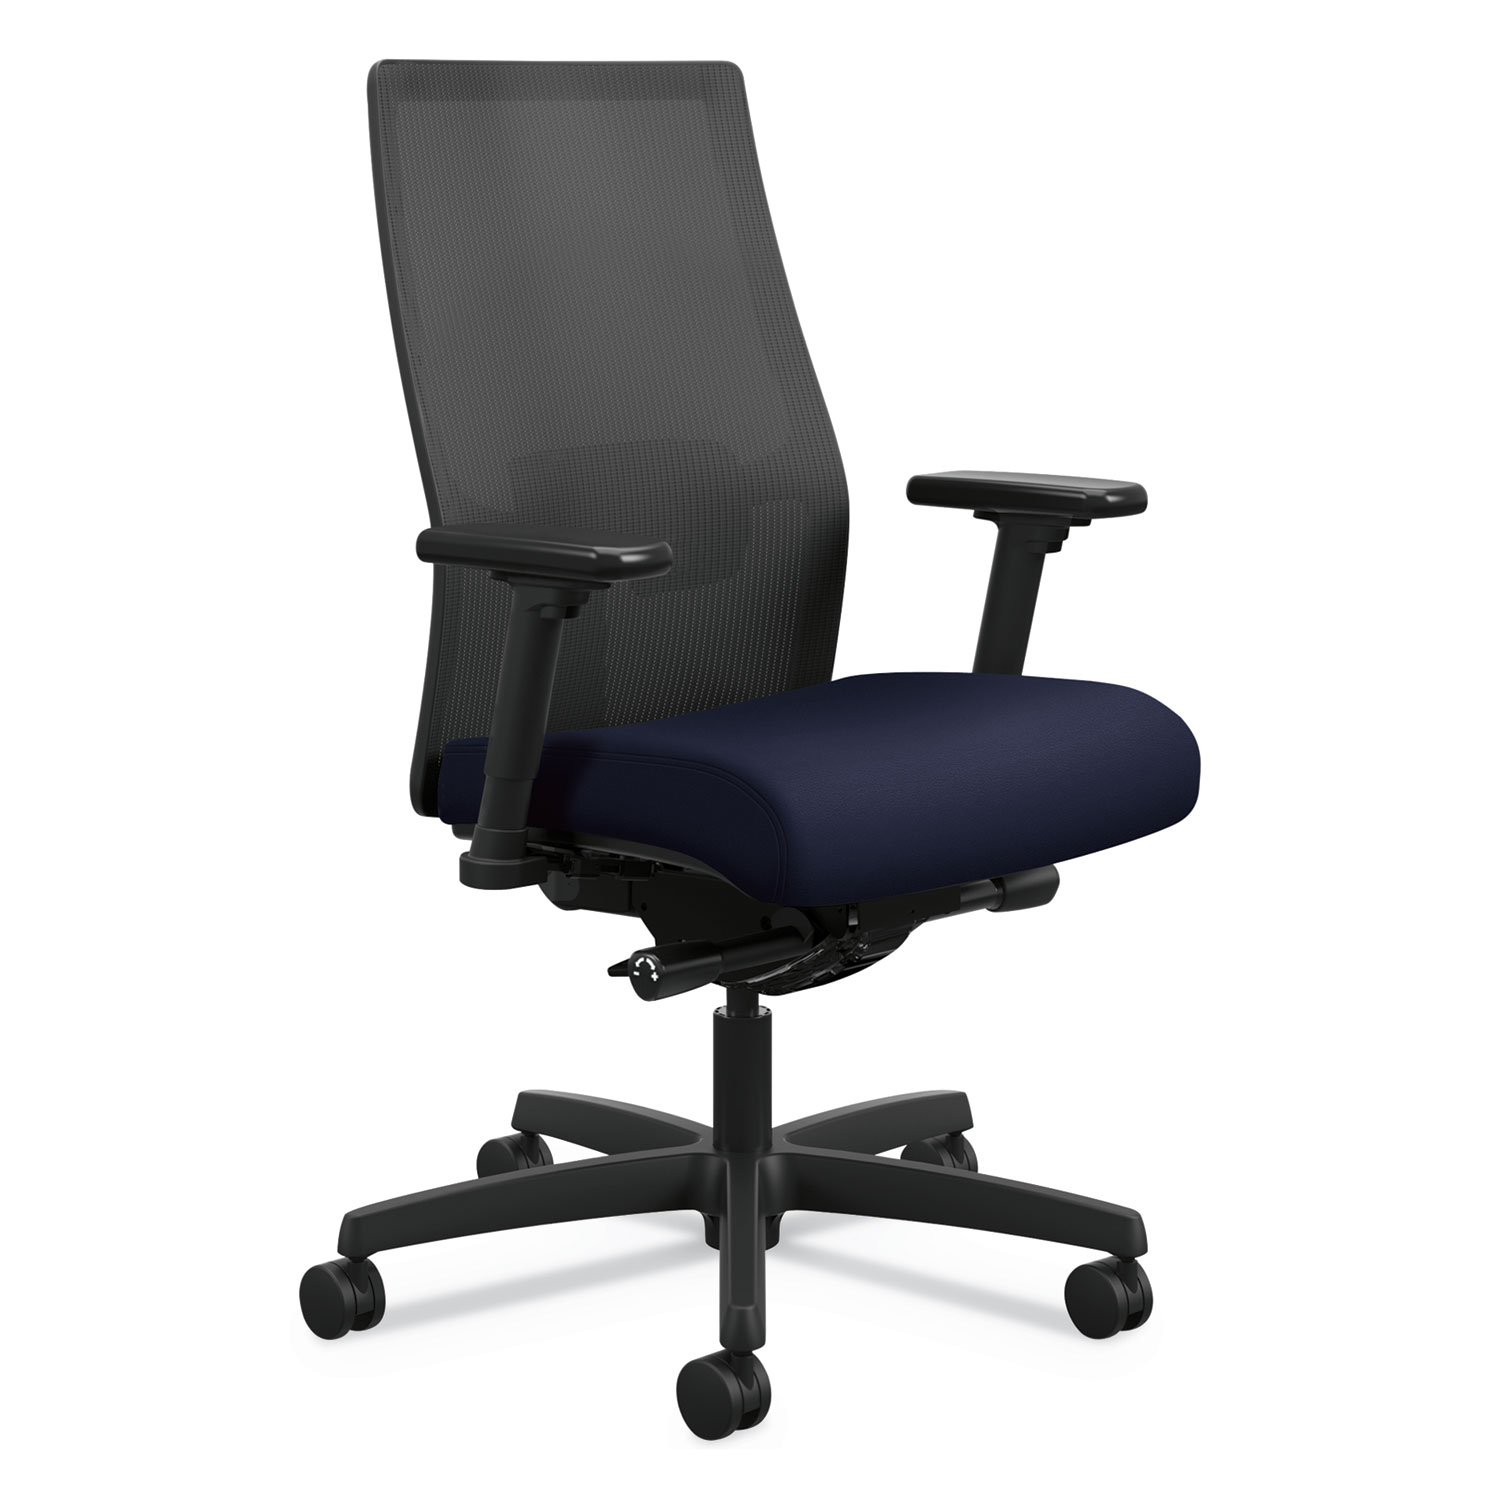  HON HONI2M2AMLC98TK Ignition 2.0 4-Way Stretch Mid-Back Mesh Task Chair, Supports up to 300 lbs., Navy Seat, Black Back/Base (HONI2M2AMLC98TK) 